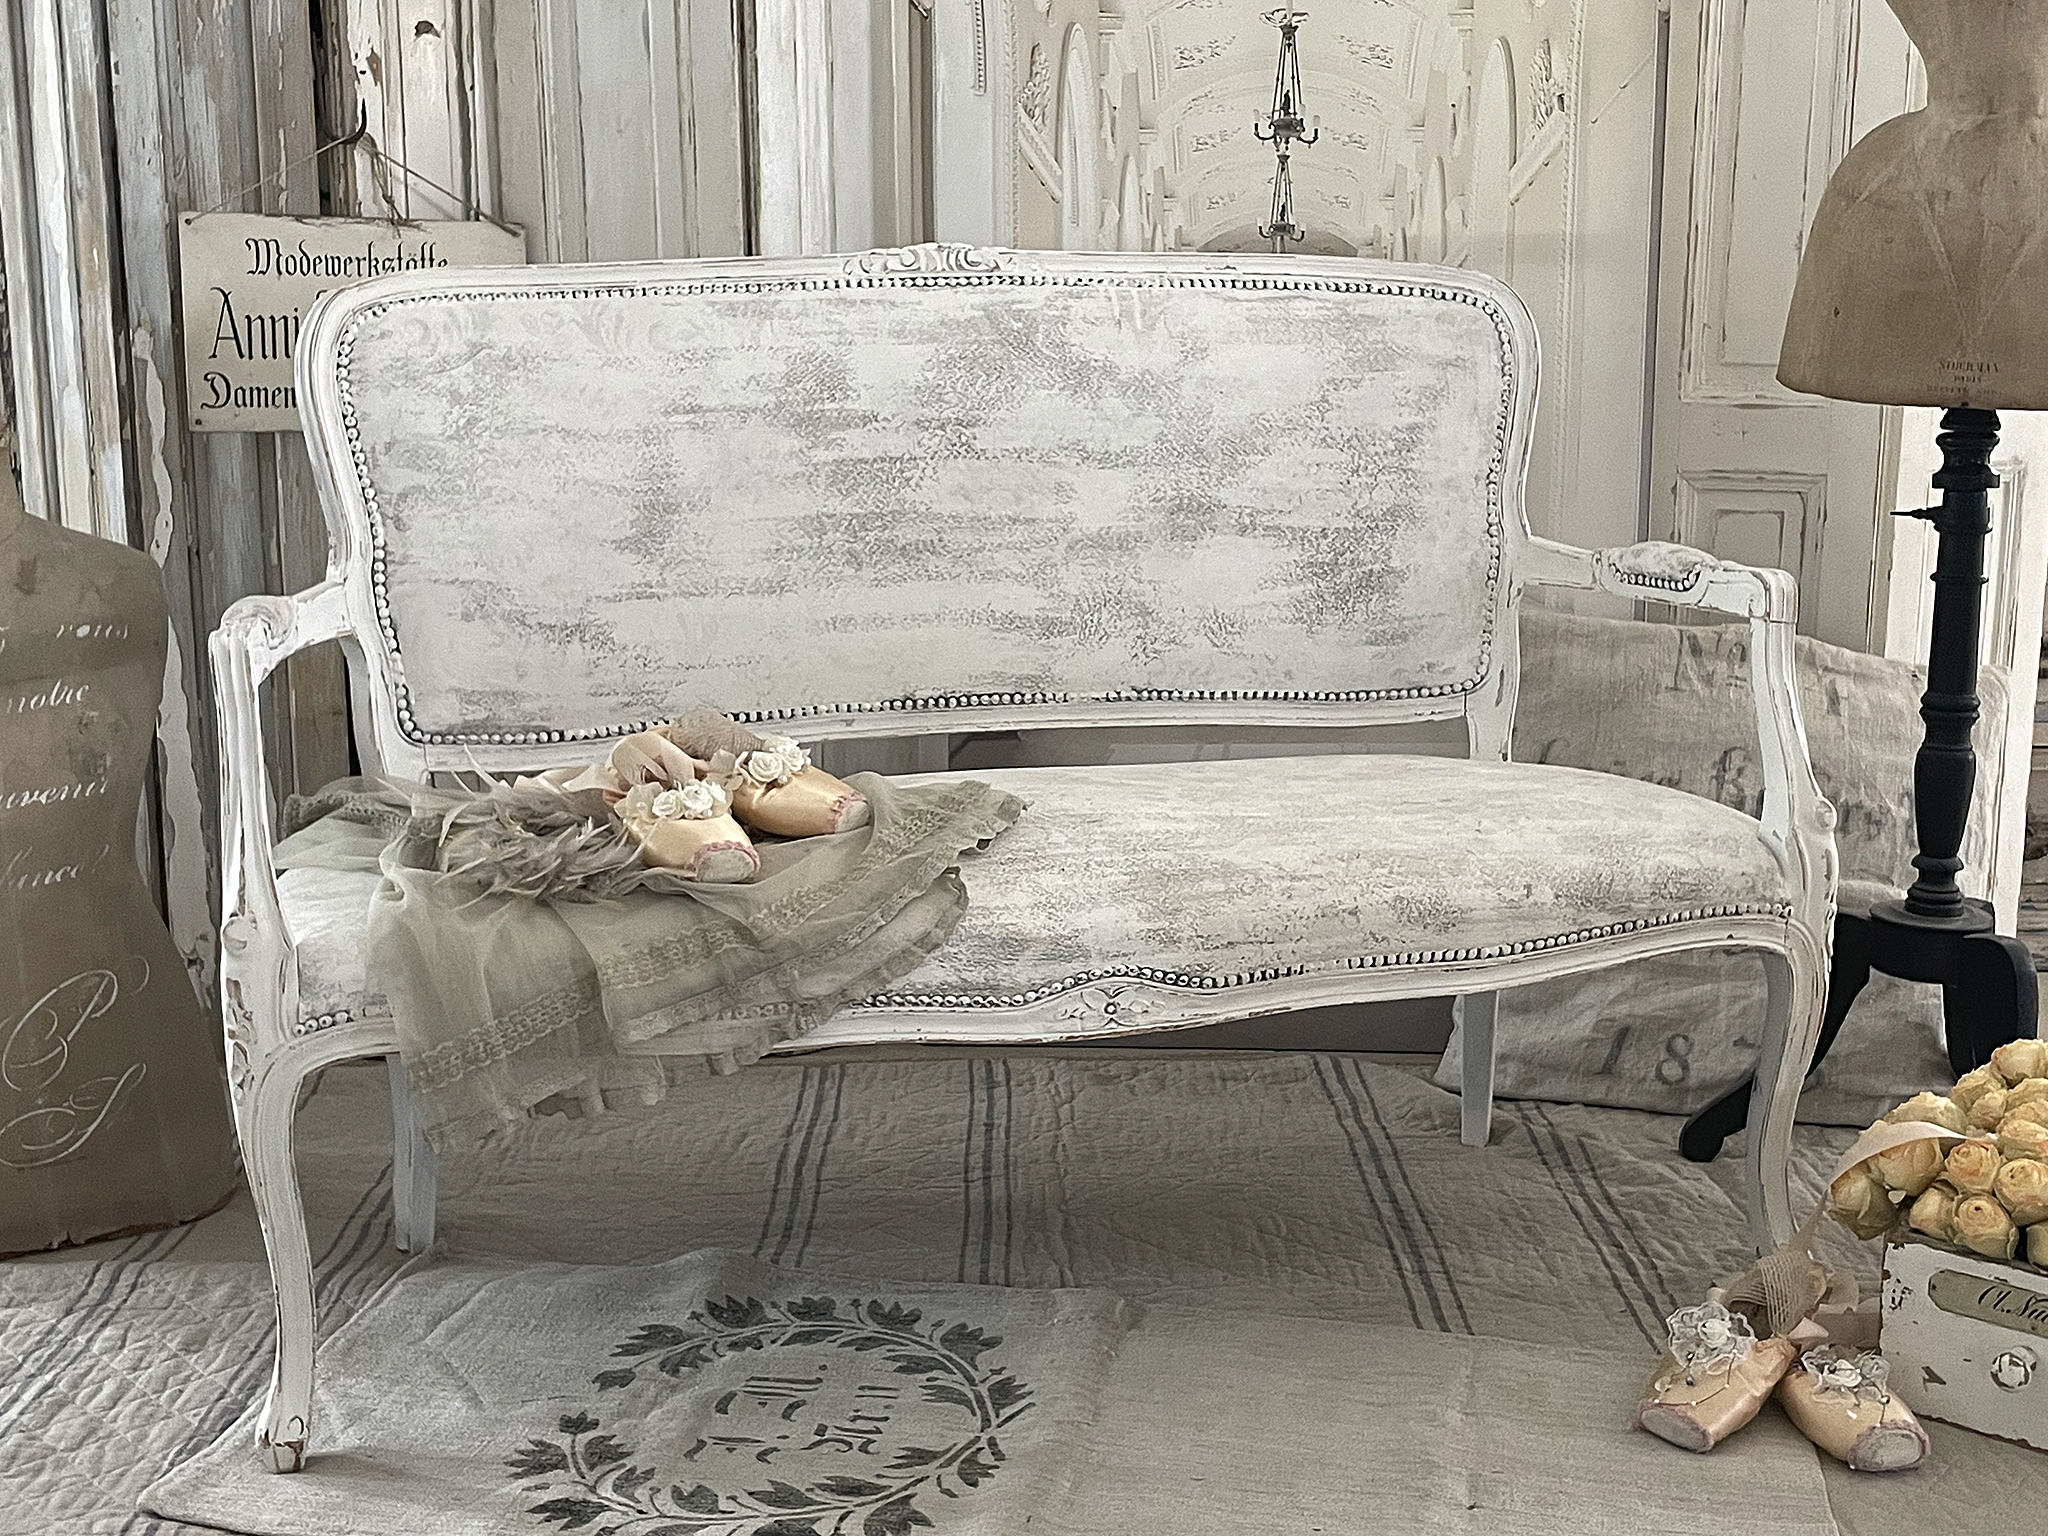 Reserviert! Louise Philippe Bank/ Shabby***